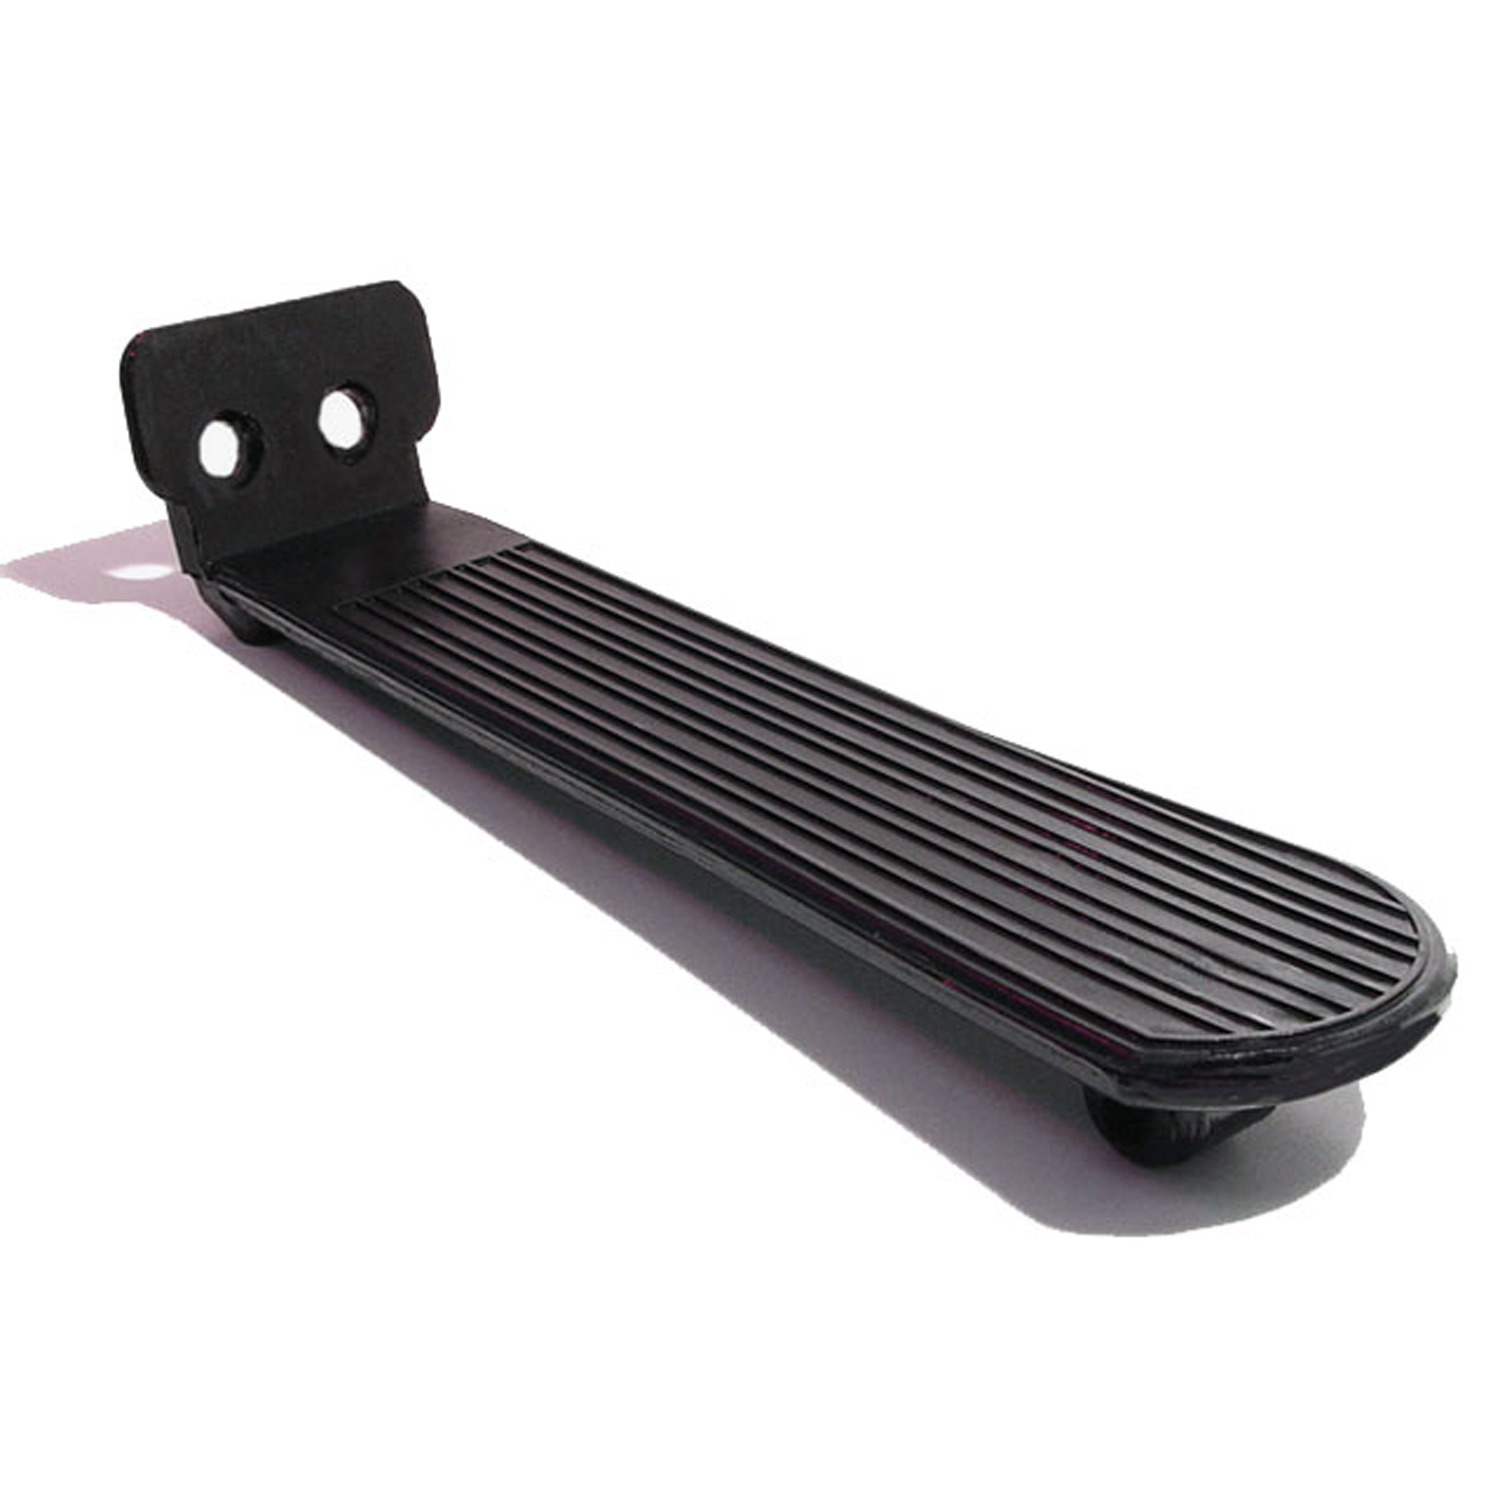 1940 Buick Century Series 60 Accelerator Pedal Pad.  Made with steel core like original-AP 29-C